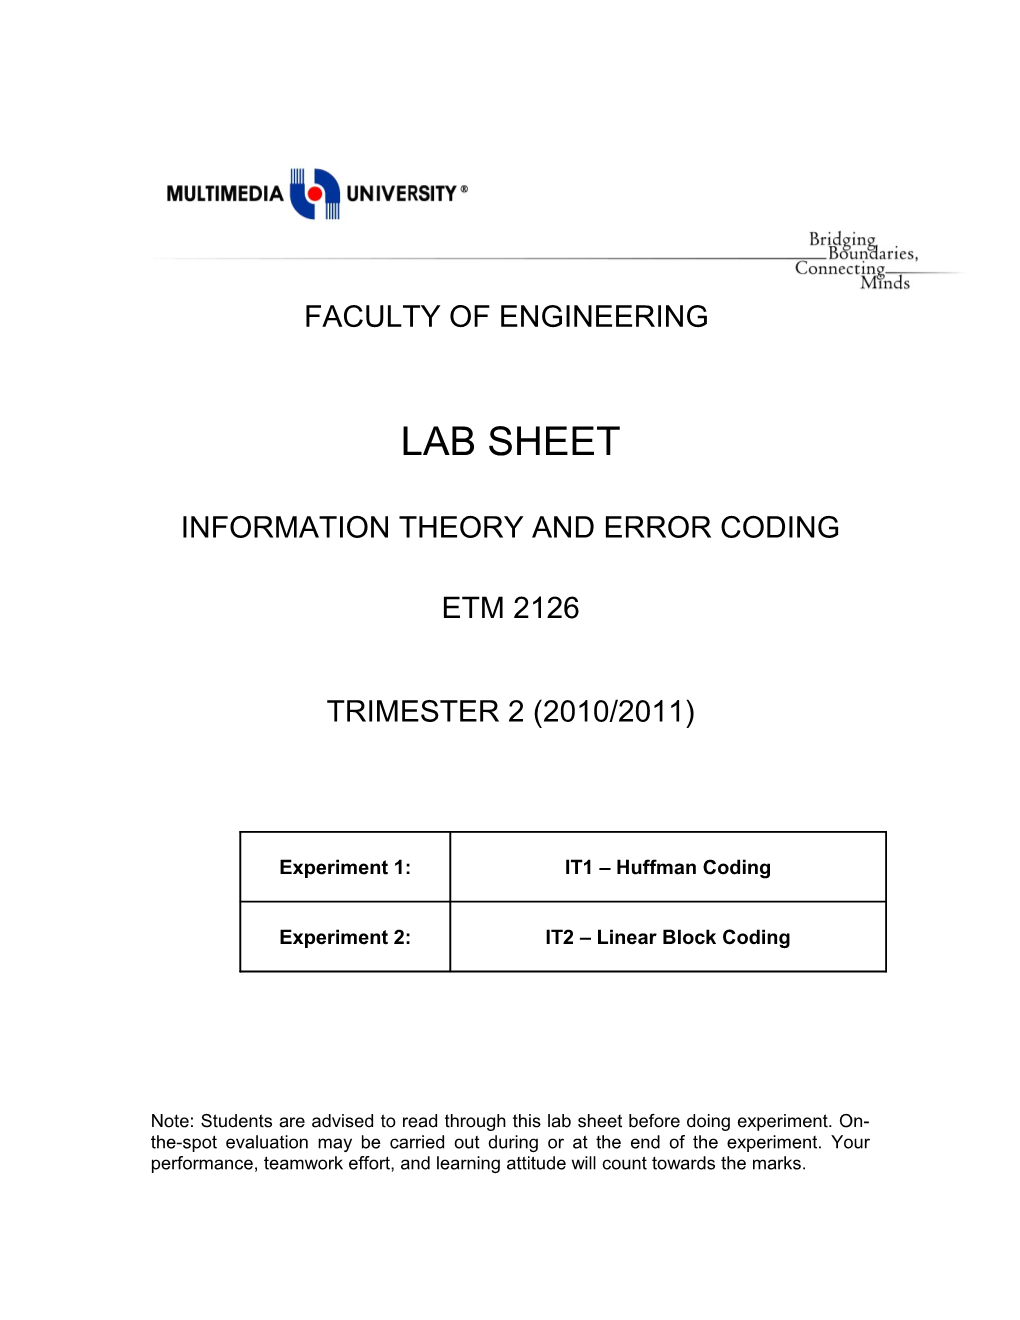 Etm2126 Information Theory and Error Coding